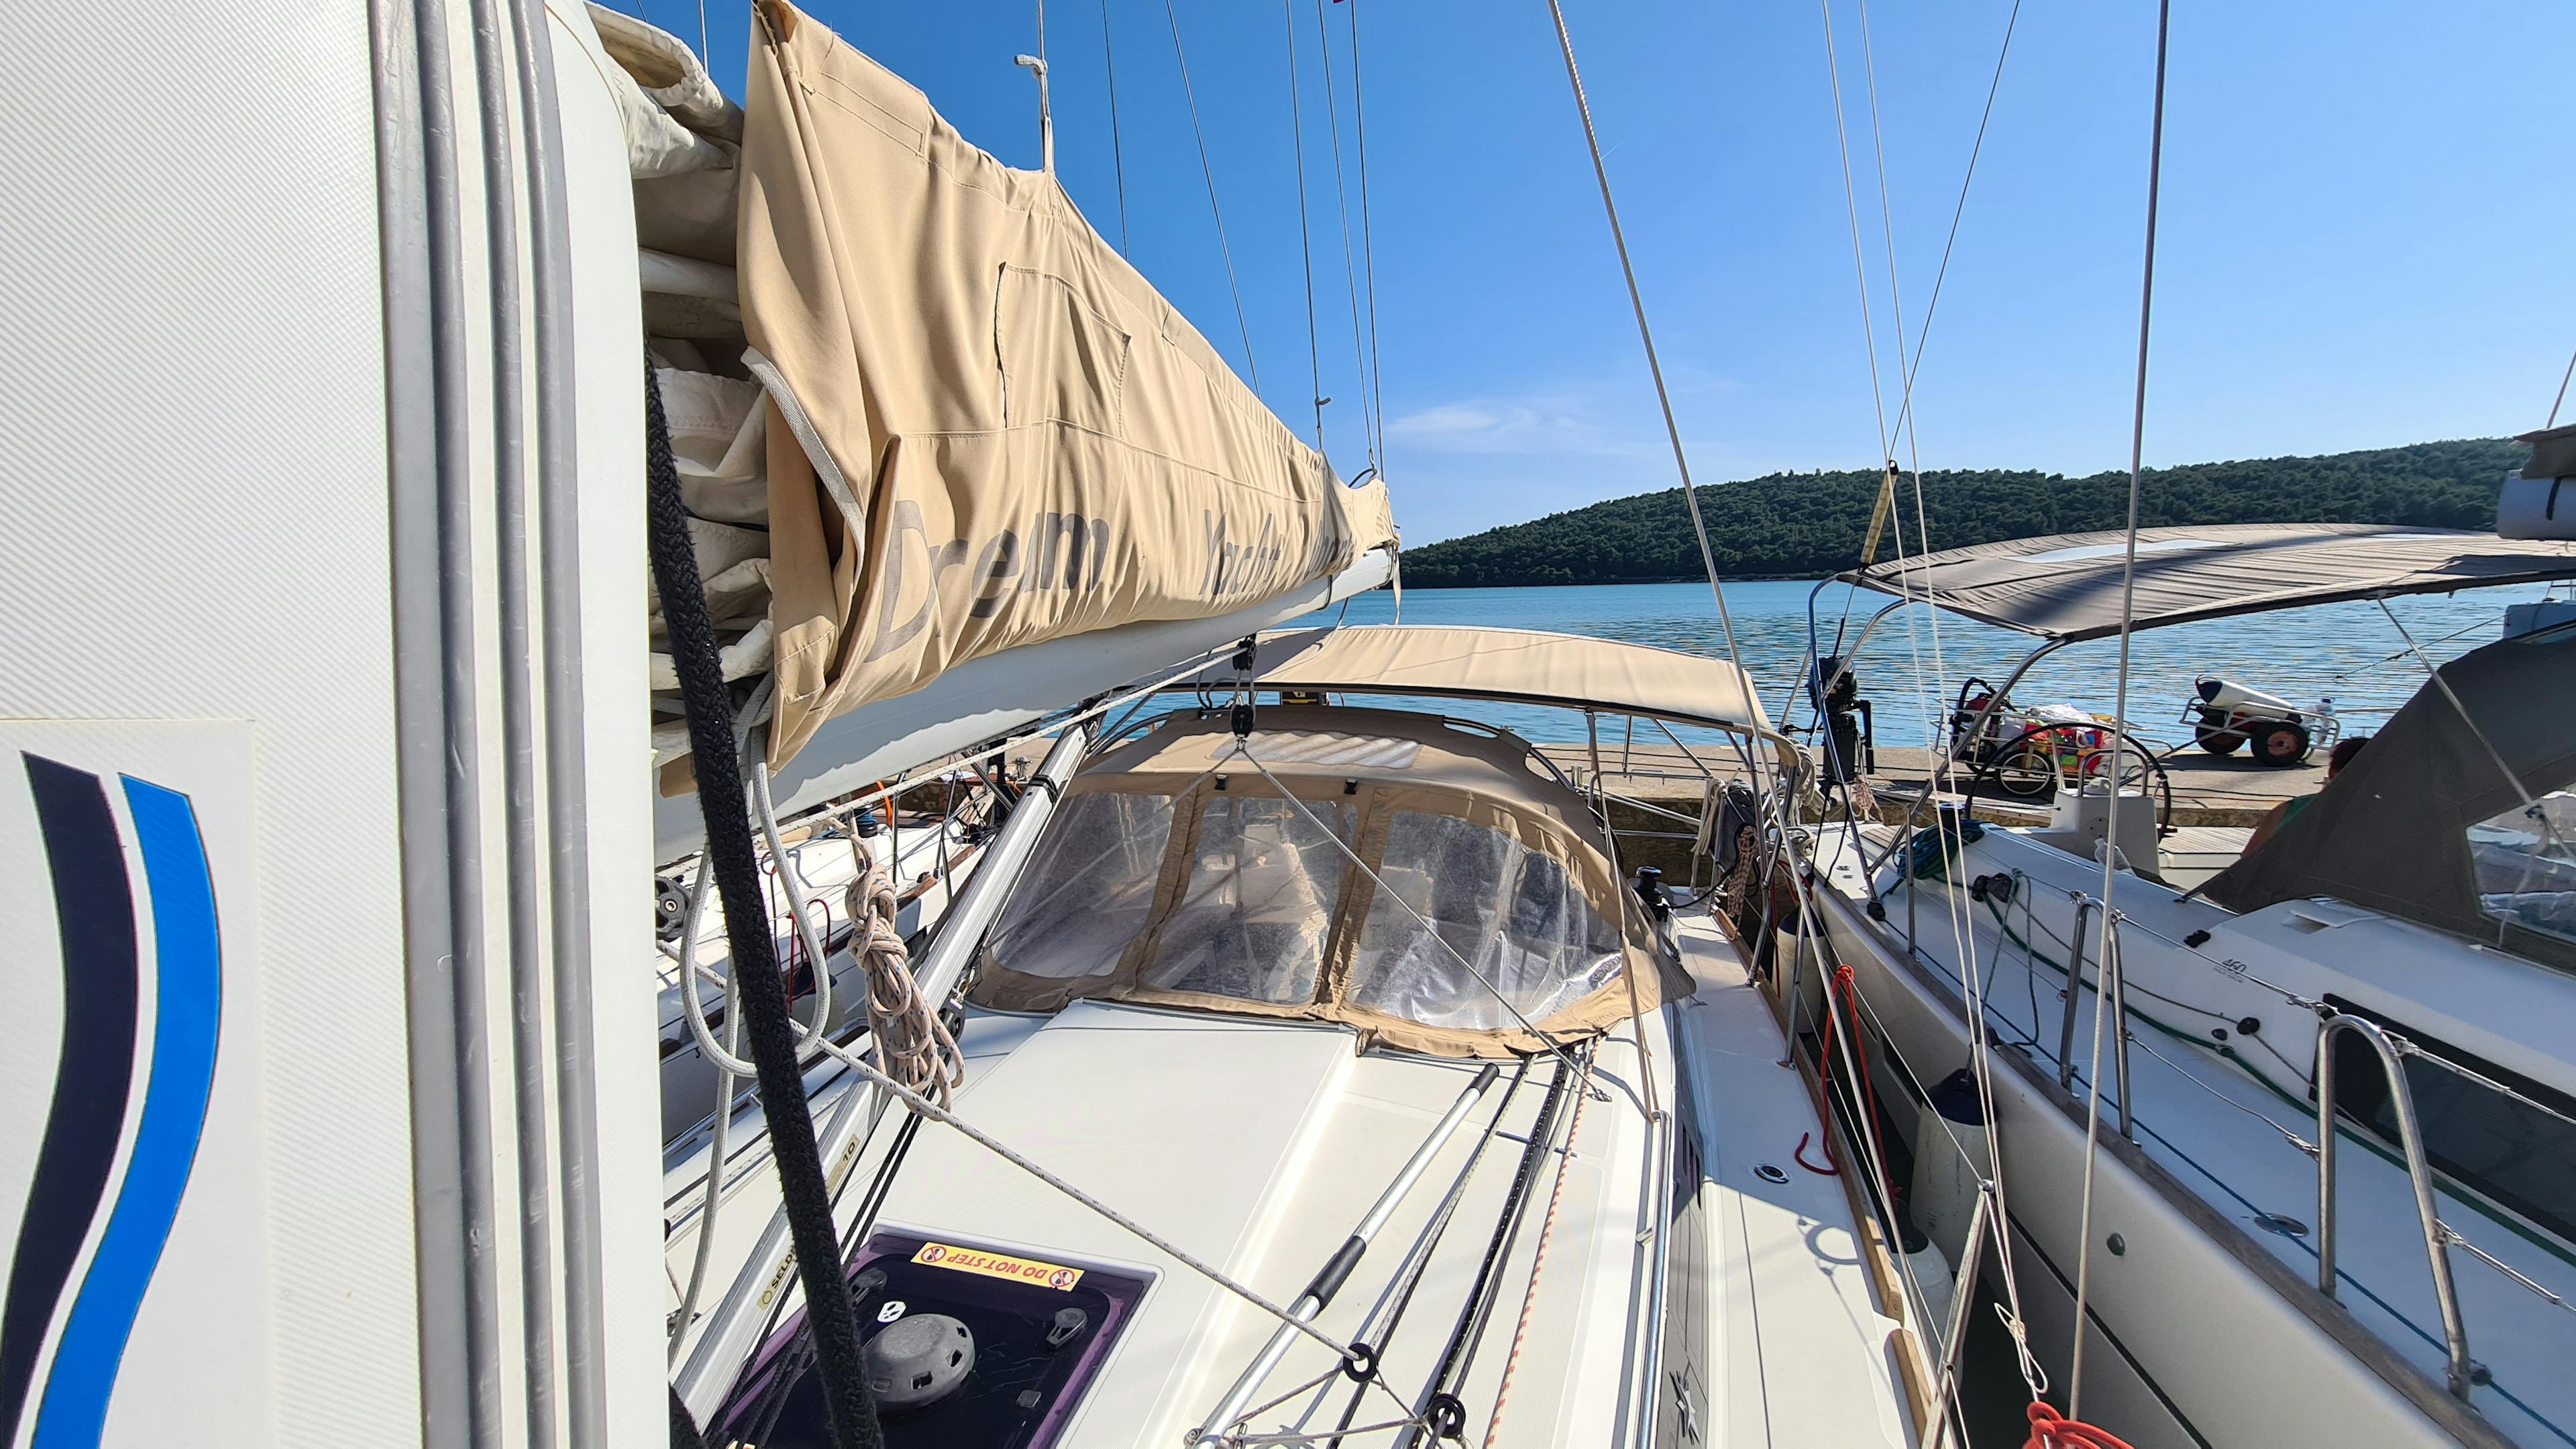 Book Sun Odyssey 349 Sailing yacht for bareboat charter in Pula, ACI Marina Pomer, Istra, Croatia with TripYacht!, picture 7